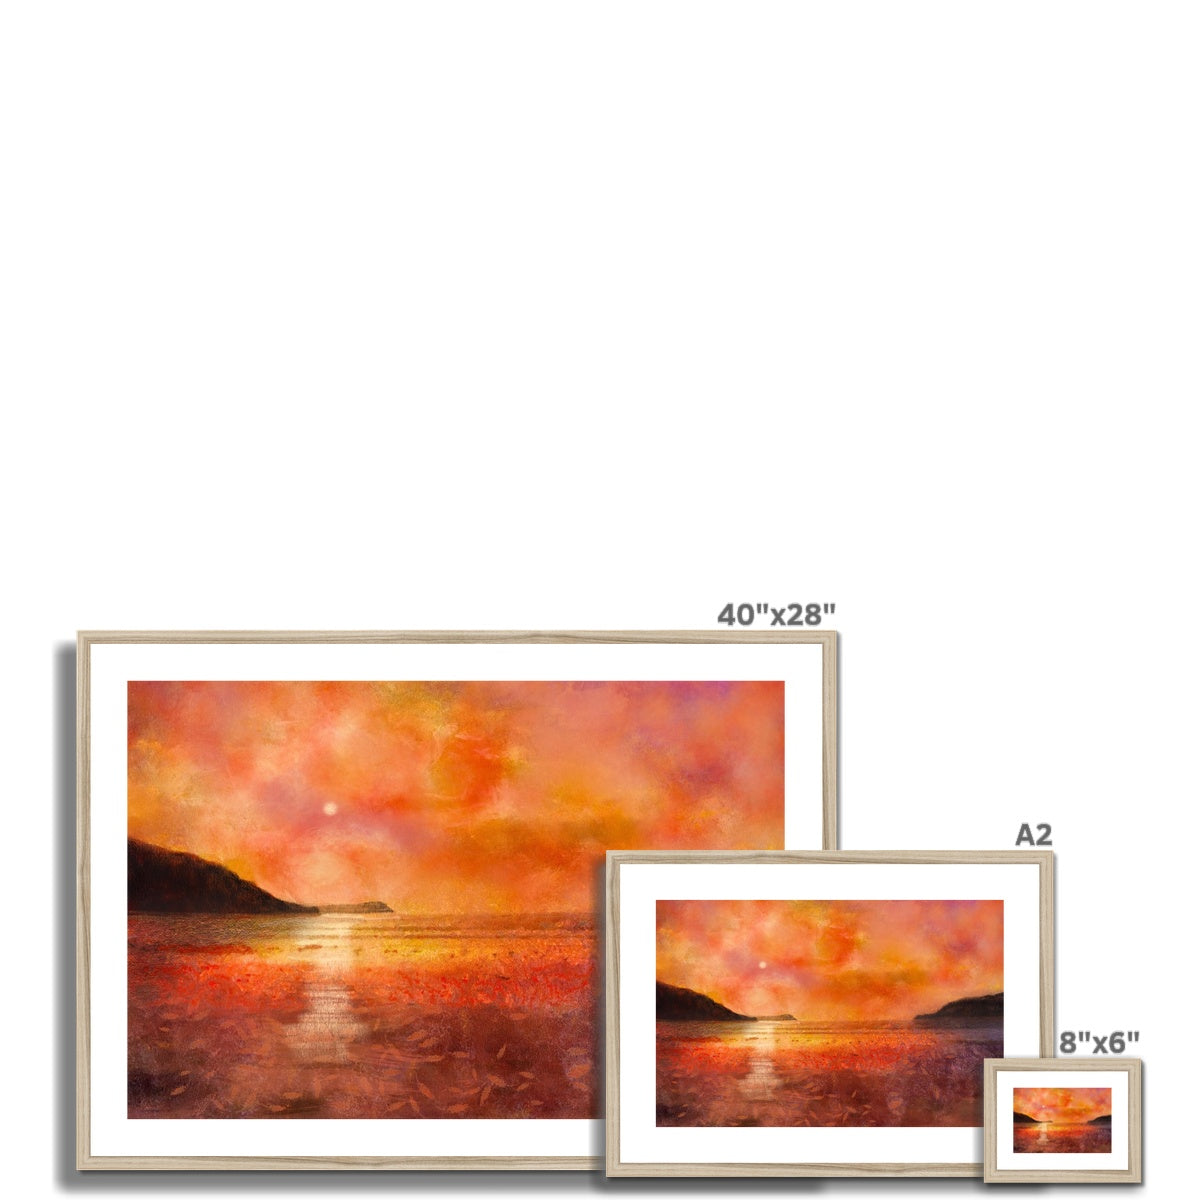 Calgary Beach Sunset Mull Painting | Framed & Mounted Prints From Scotland-Framed & Mounted Prints-Hebridean Islands Art Gallery-Paintings, Prints, Homeware, Art Gifts From Scotland By Scottish Artist Kevin Hunter